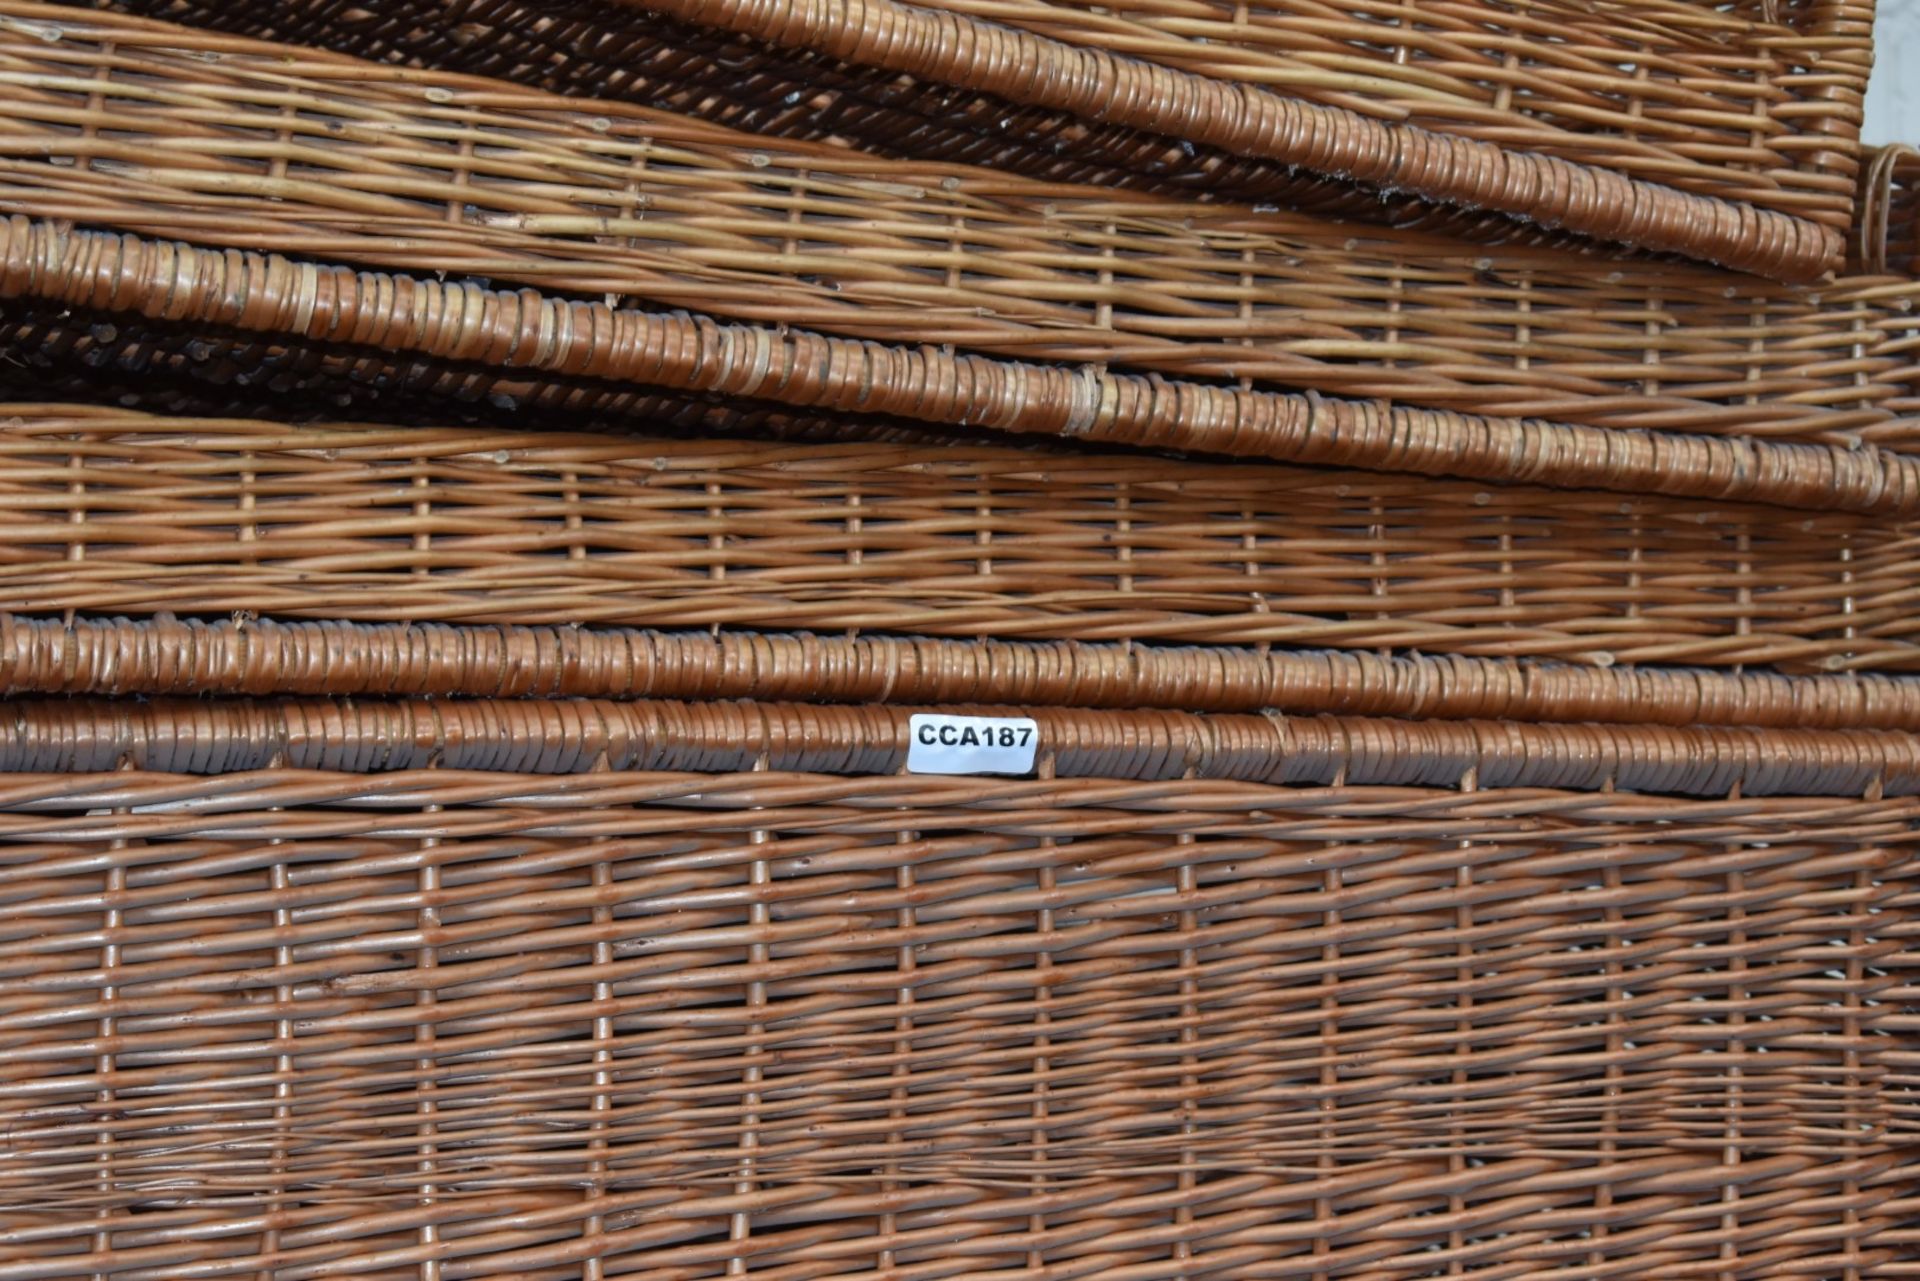 6 x Large Wicker Bread Baskets - Dimensions: W115  x D80 cms - Ref: CCA187 WH4 - CL595 - Location: - Image 5 of 5